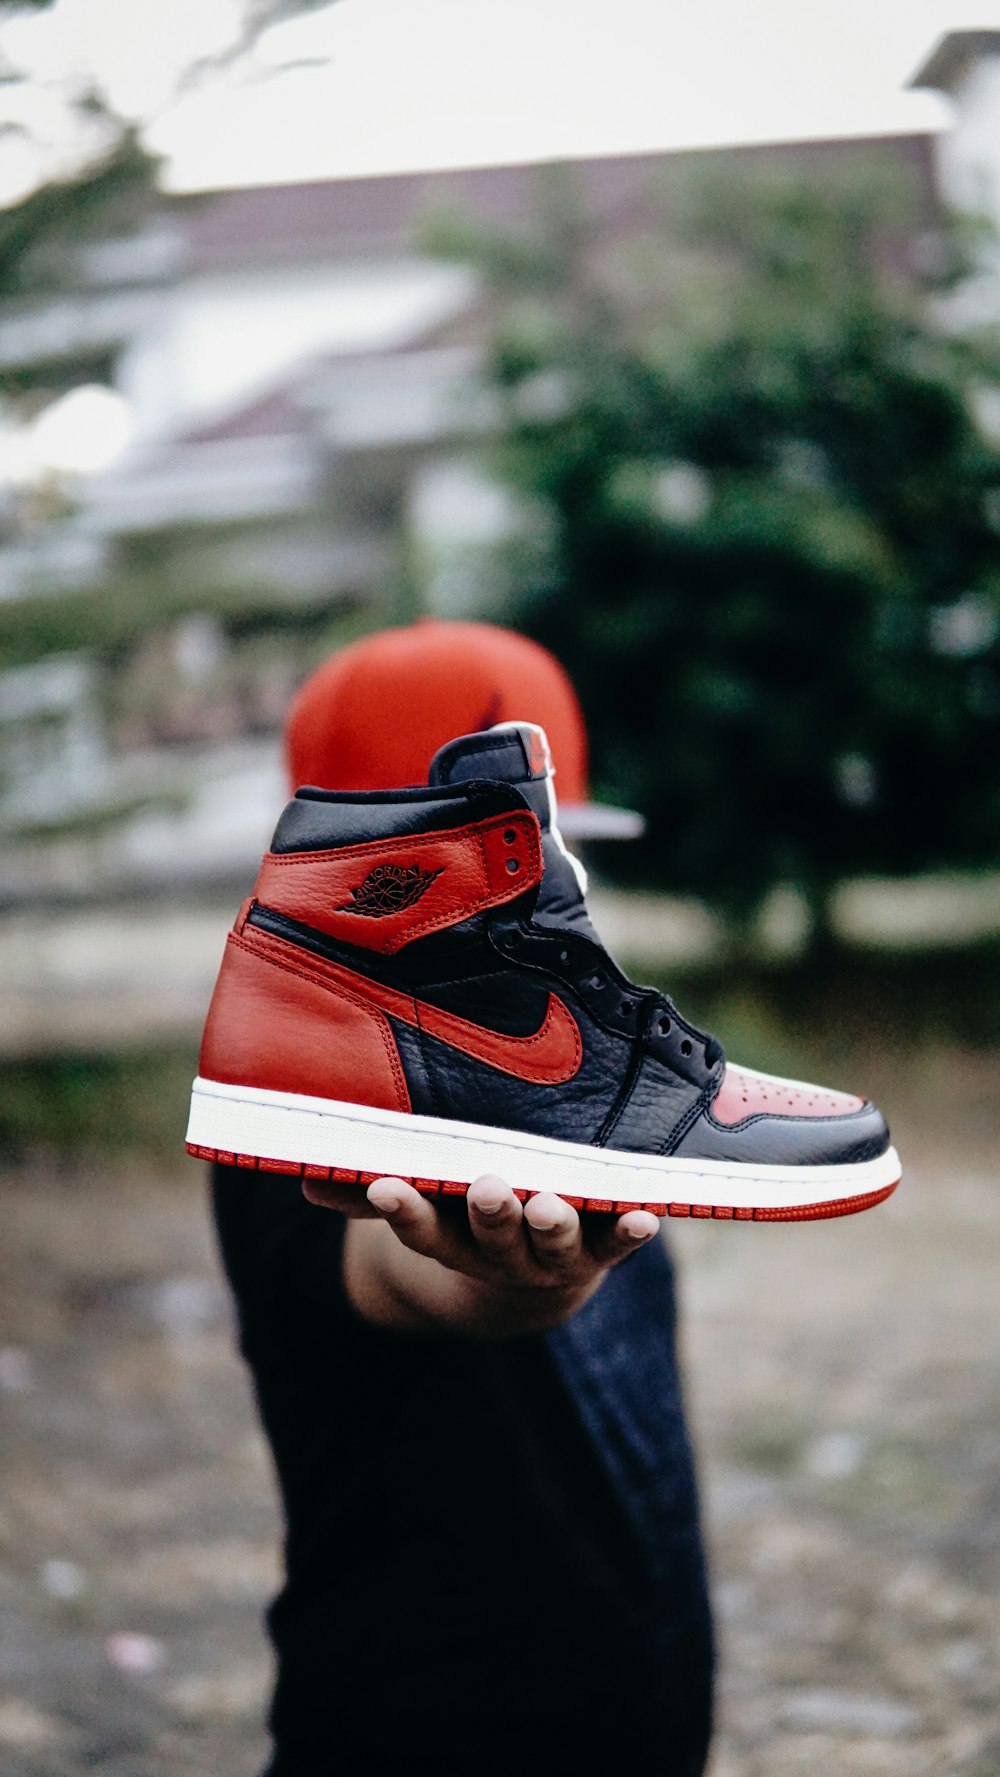 selective focus photo of person holding unpaired black and red Nike Air Jordan 1 shoe